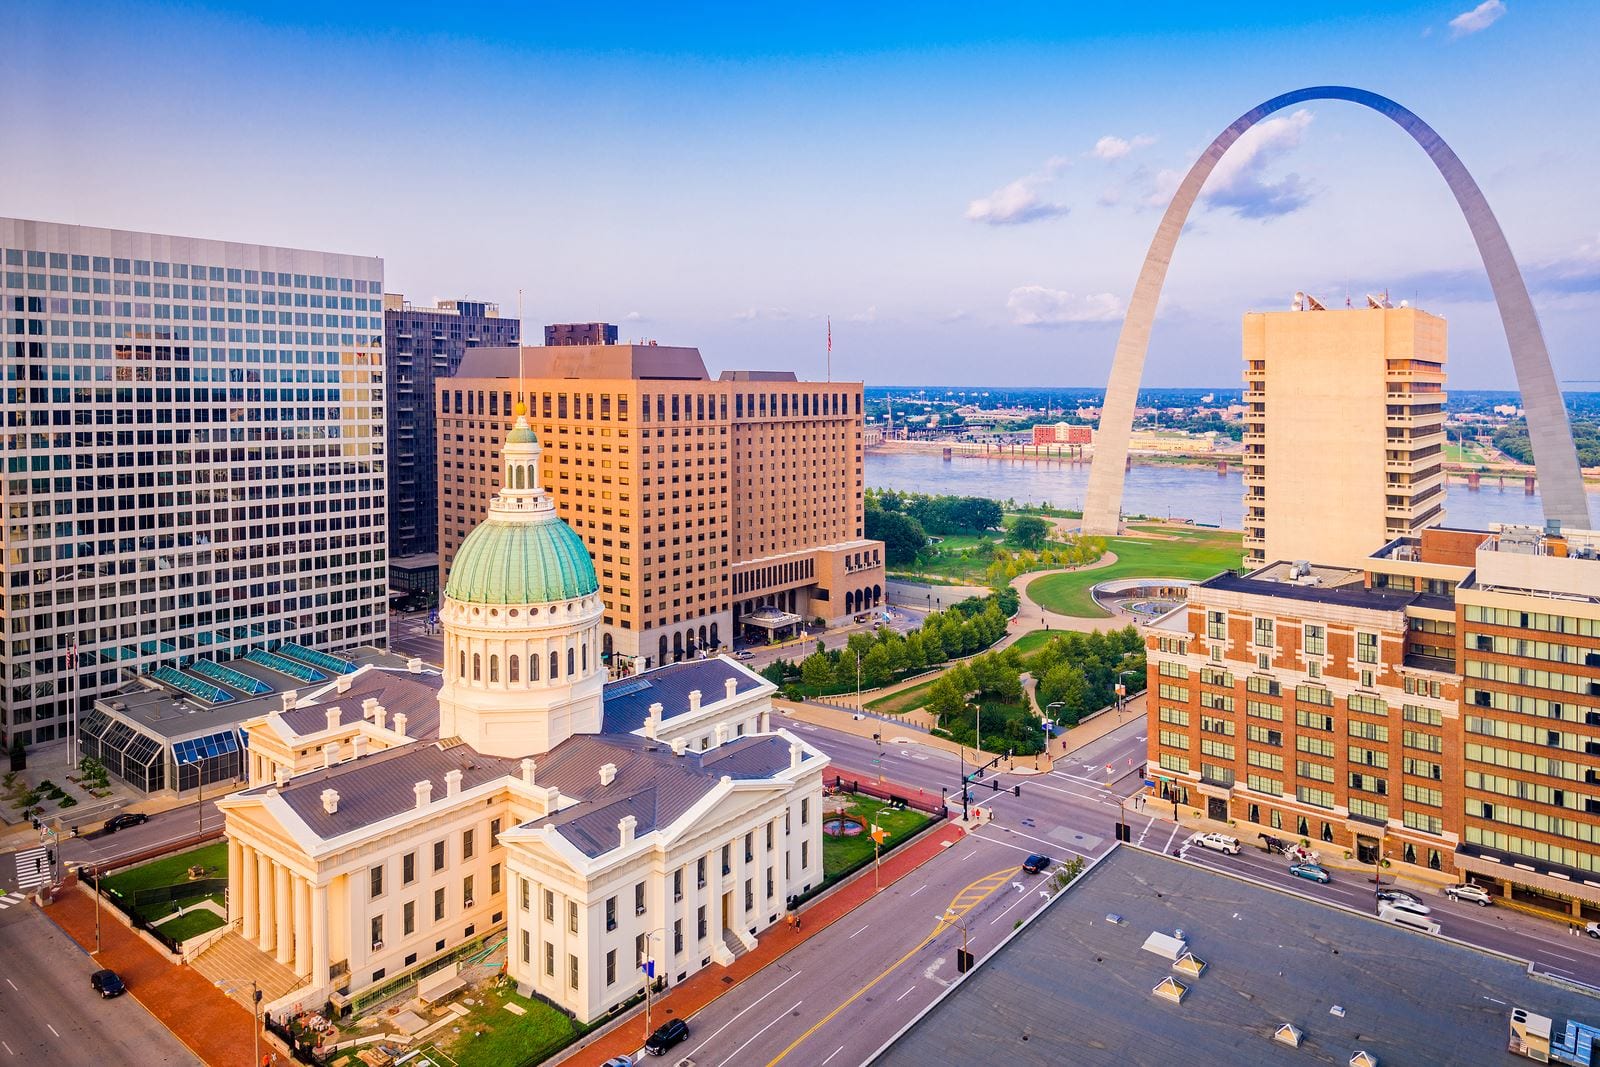 23++ Back taxes homes for sale in st louis mo ideas